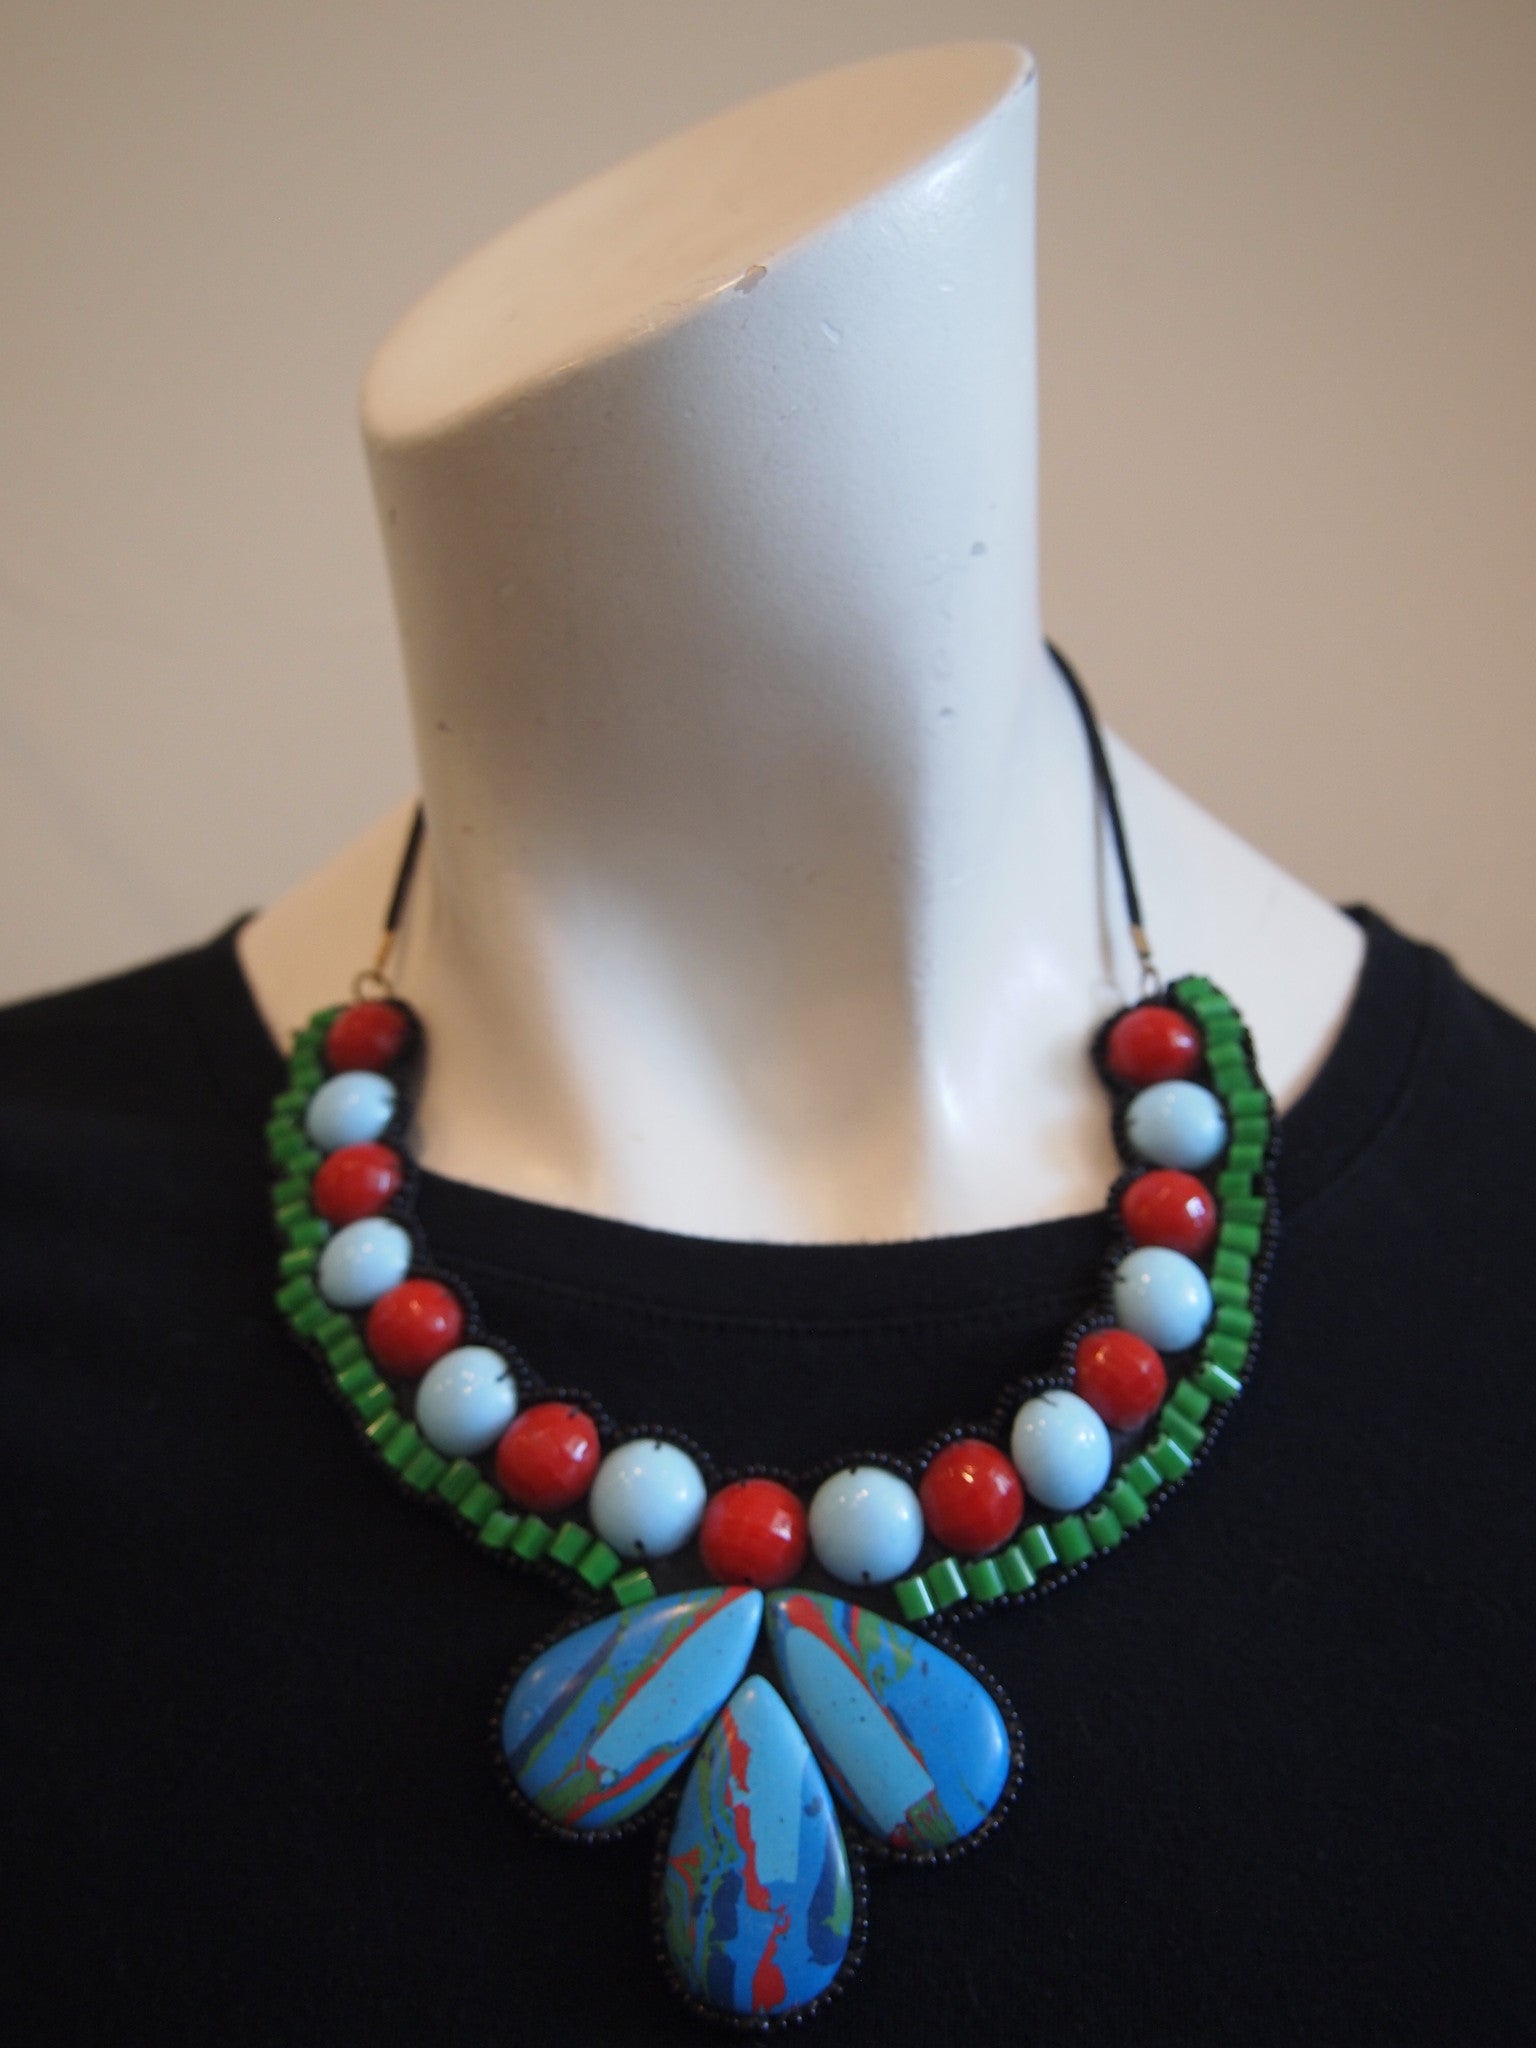 Handmade Accent Necklace - Bright Curve